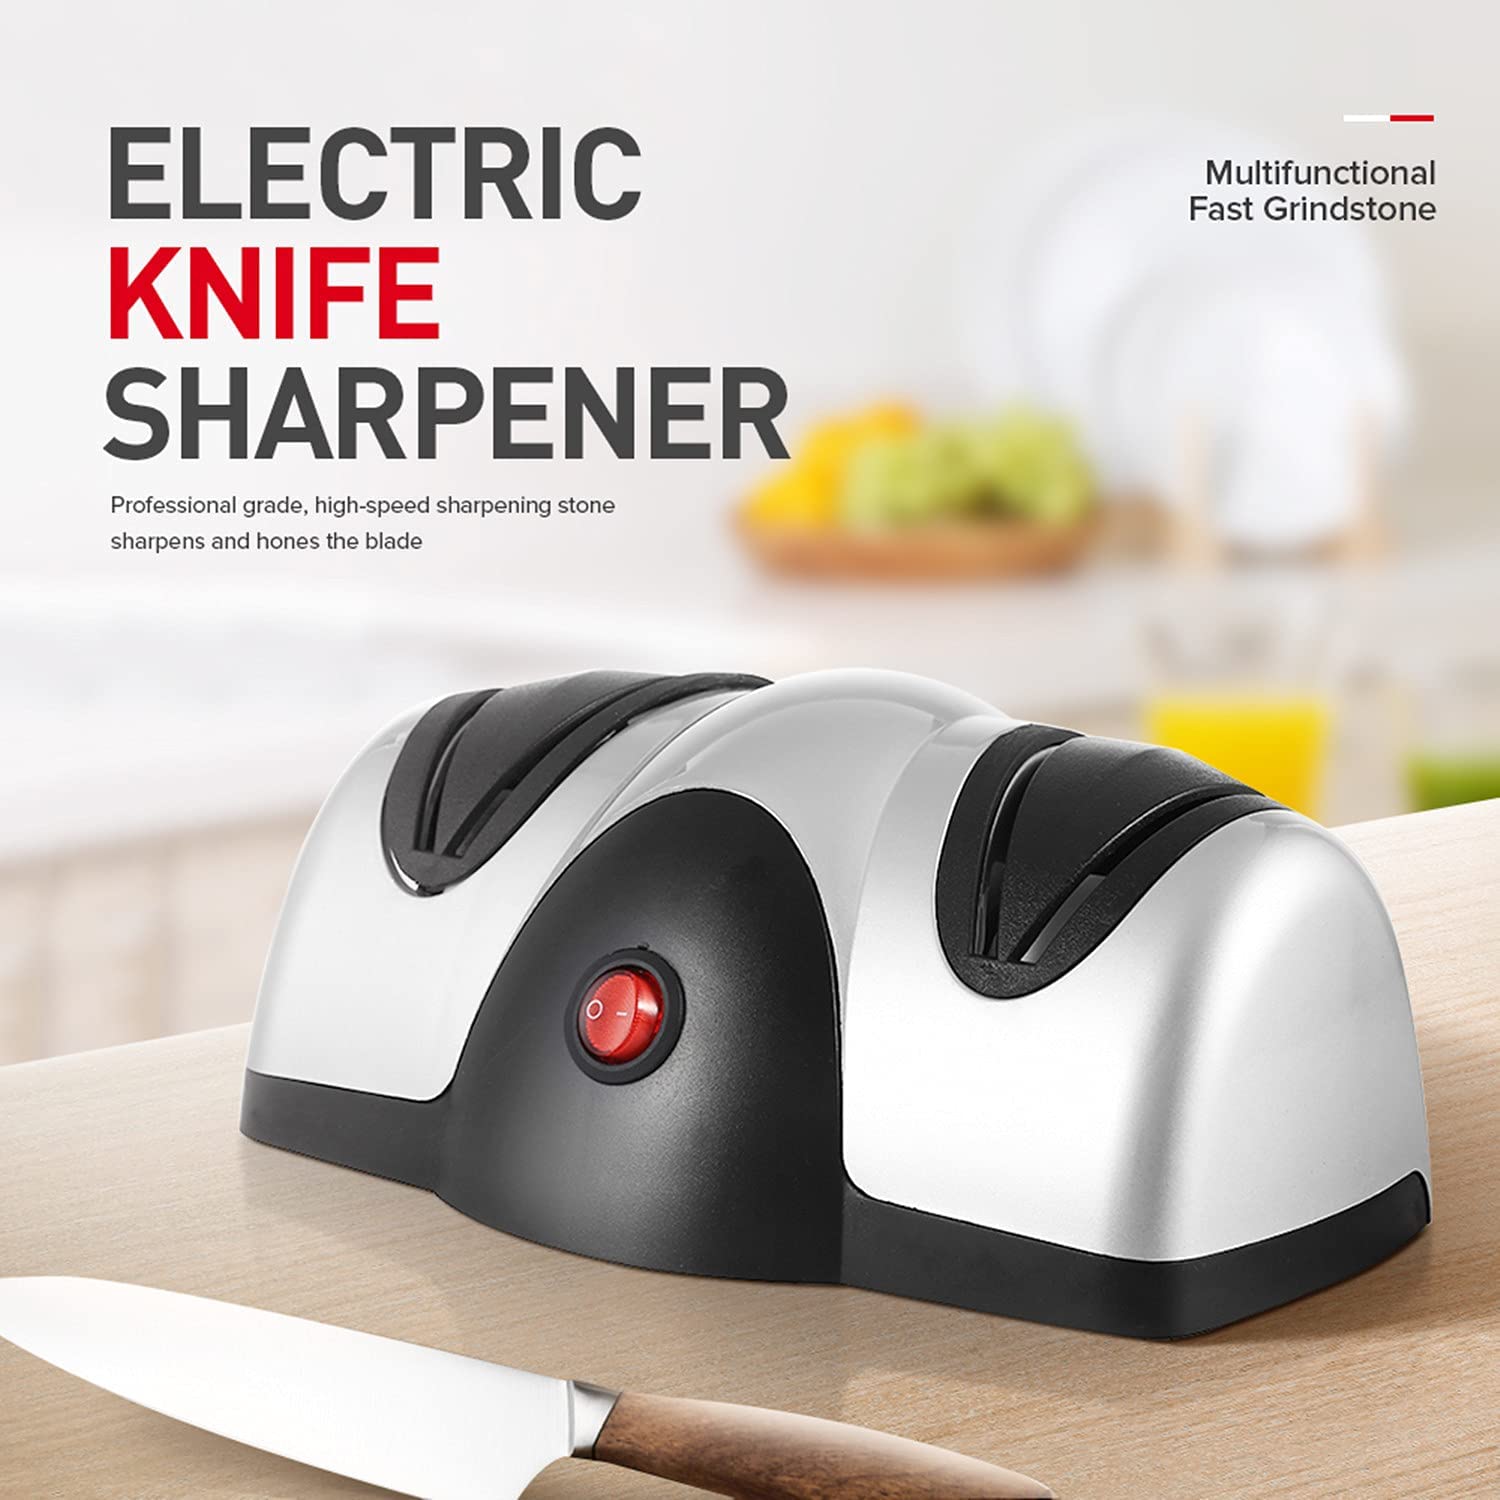 Professional Kitchen Electric Knife Sharpener placed next to a knife